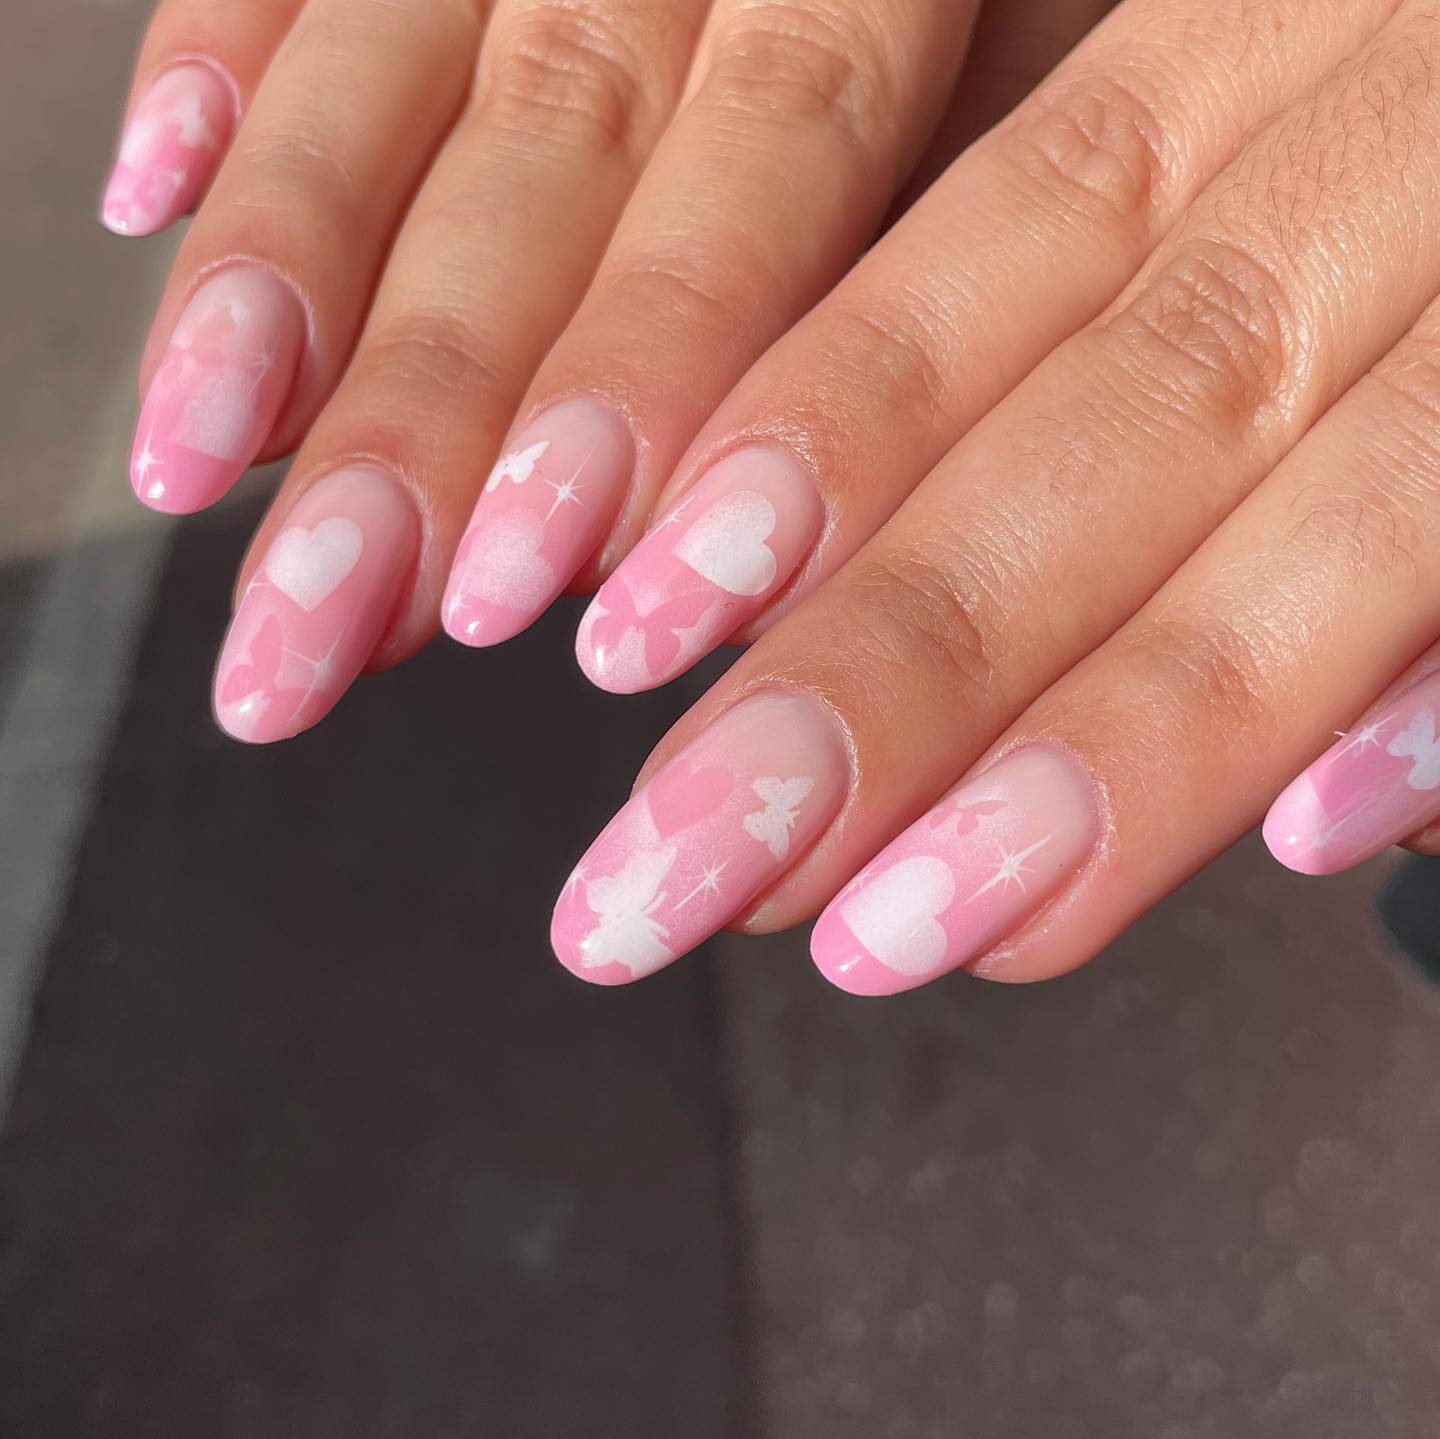 20 Baby Pink Nail Ideas That Prove Pastel Pink Is the Manicure of the Season